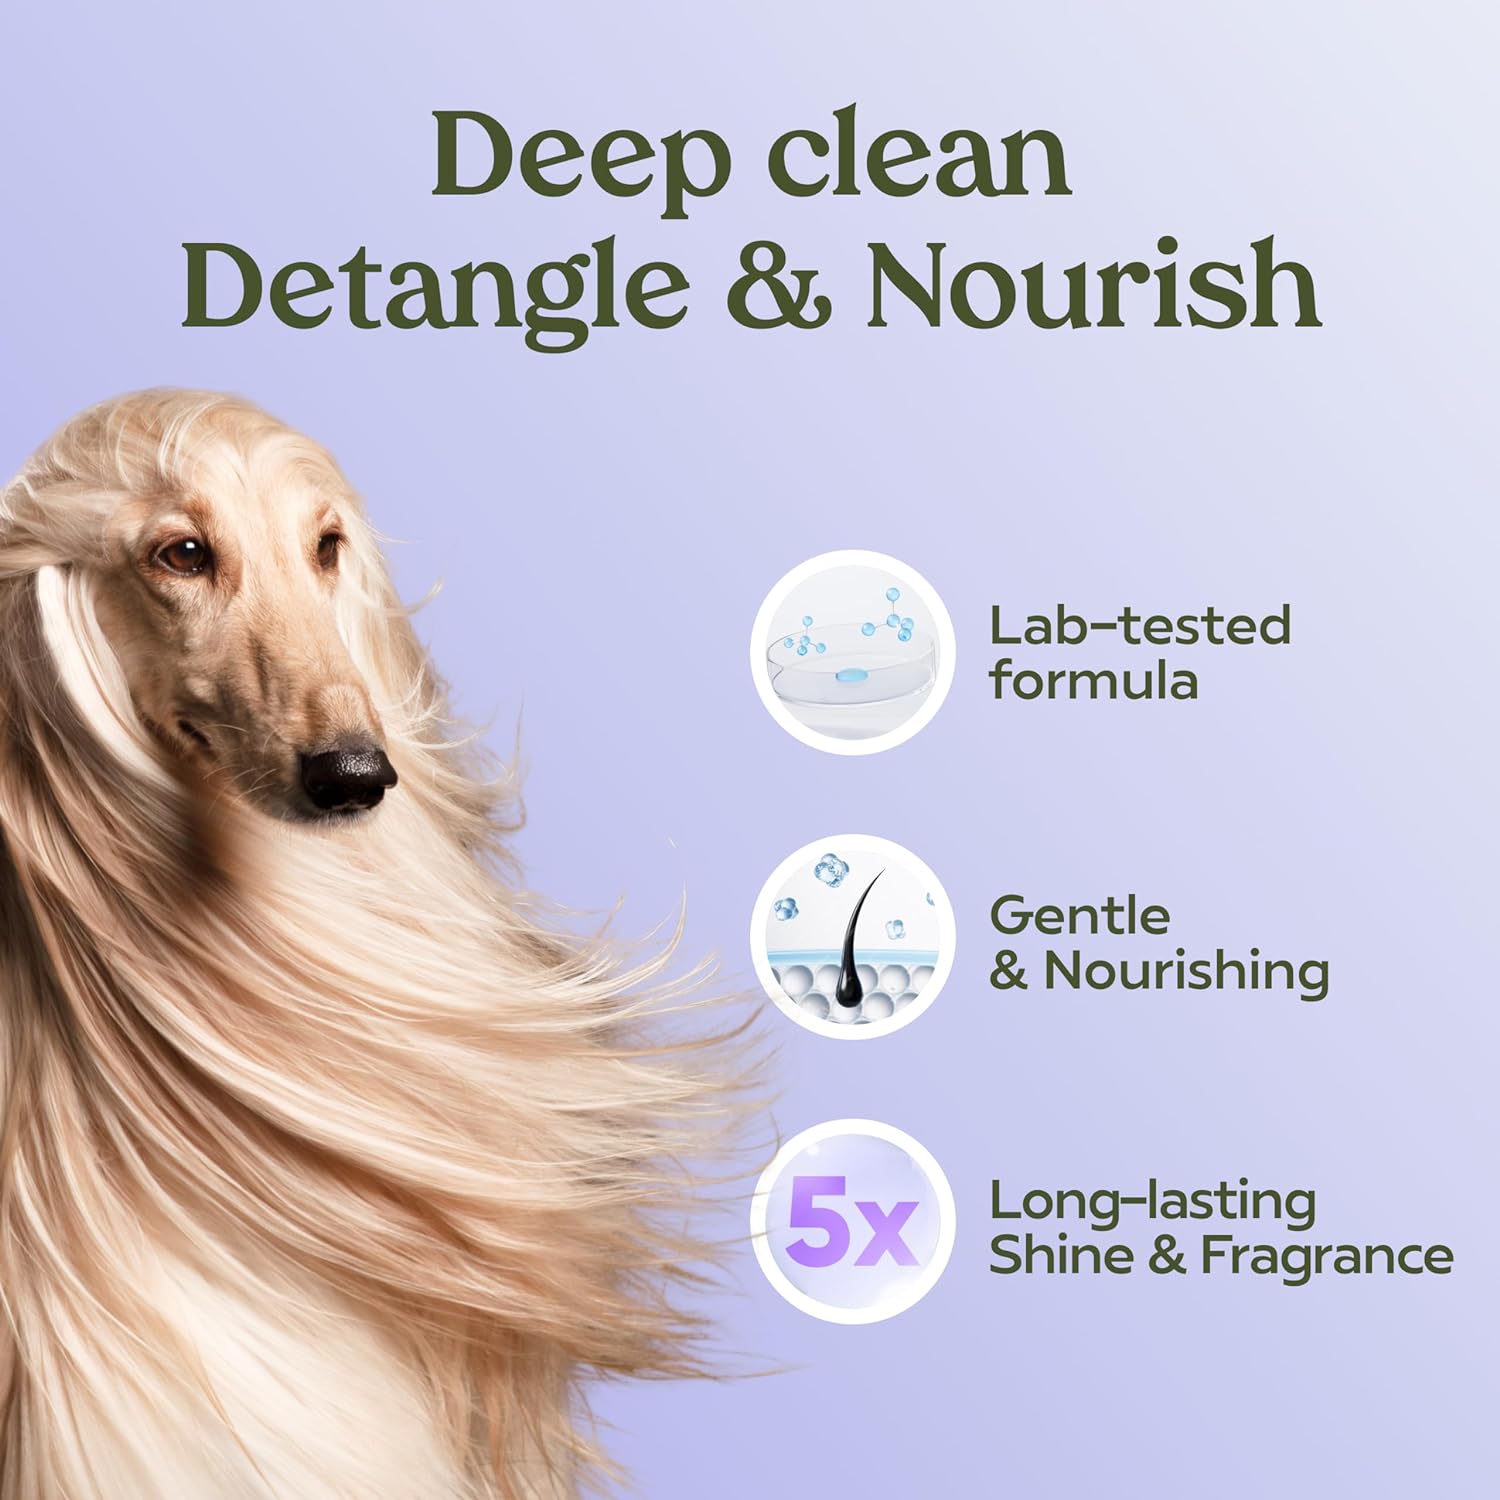 Pawfume Dog Shampoo and Conditioner – Hypoallergenic Dog Shampoo for Smelly Dogs – Best Dog Shampoos & Conditioners – Probiotic Pet Shampoo for Dogs – Best Dog Shampoo for Puppies (Lavender, 2-Pack)